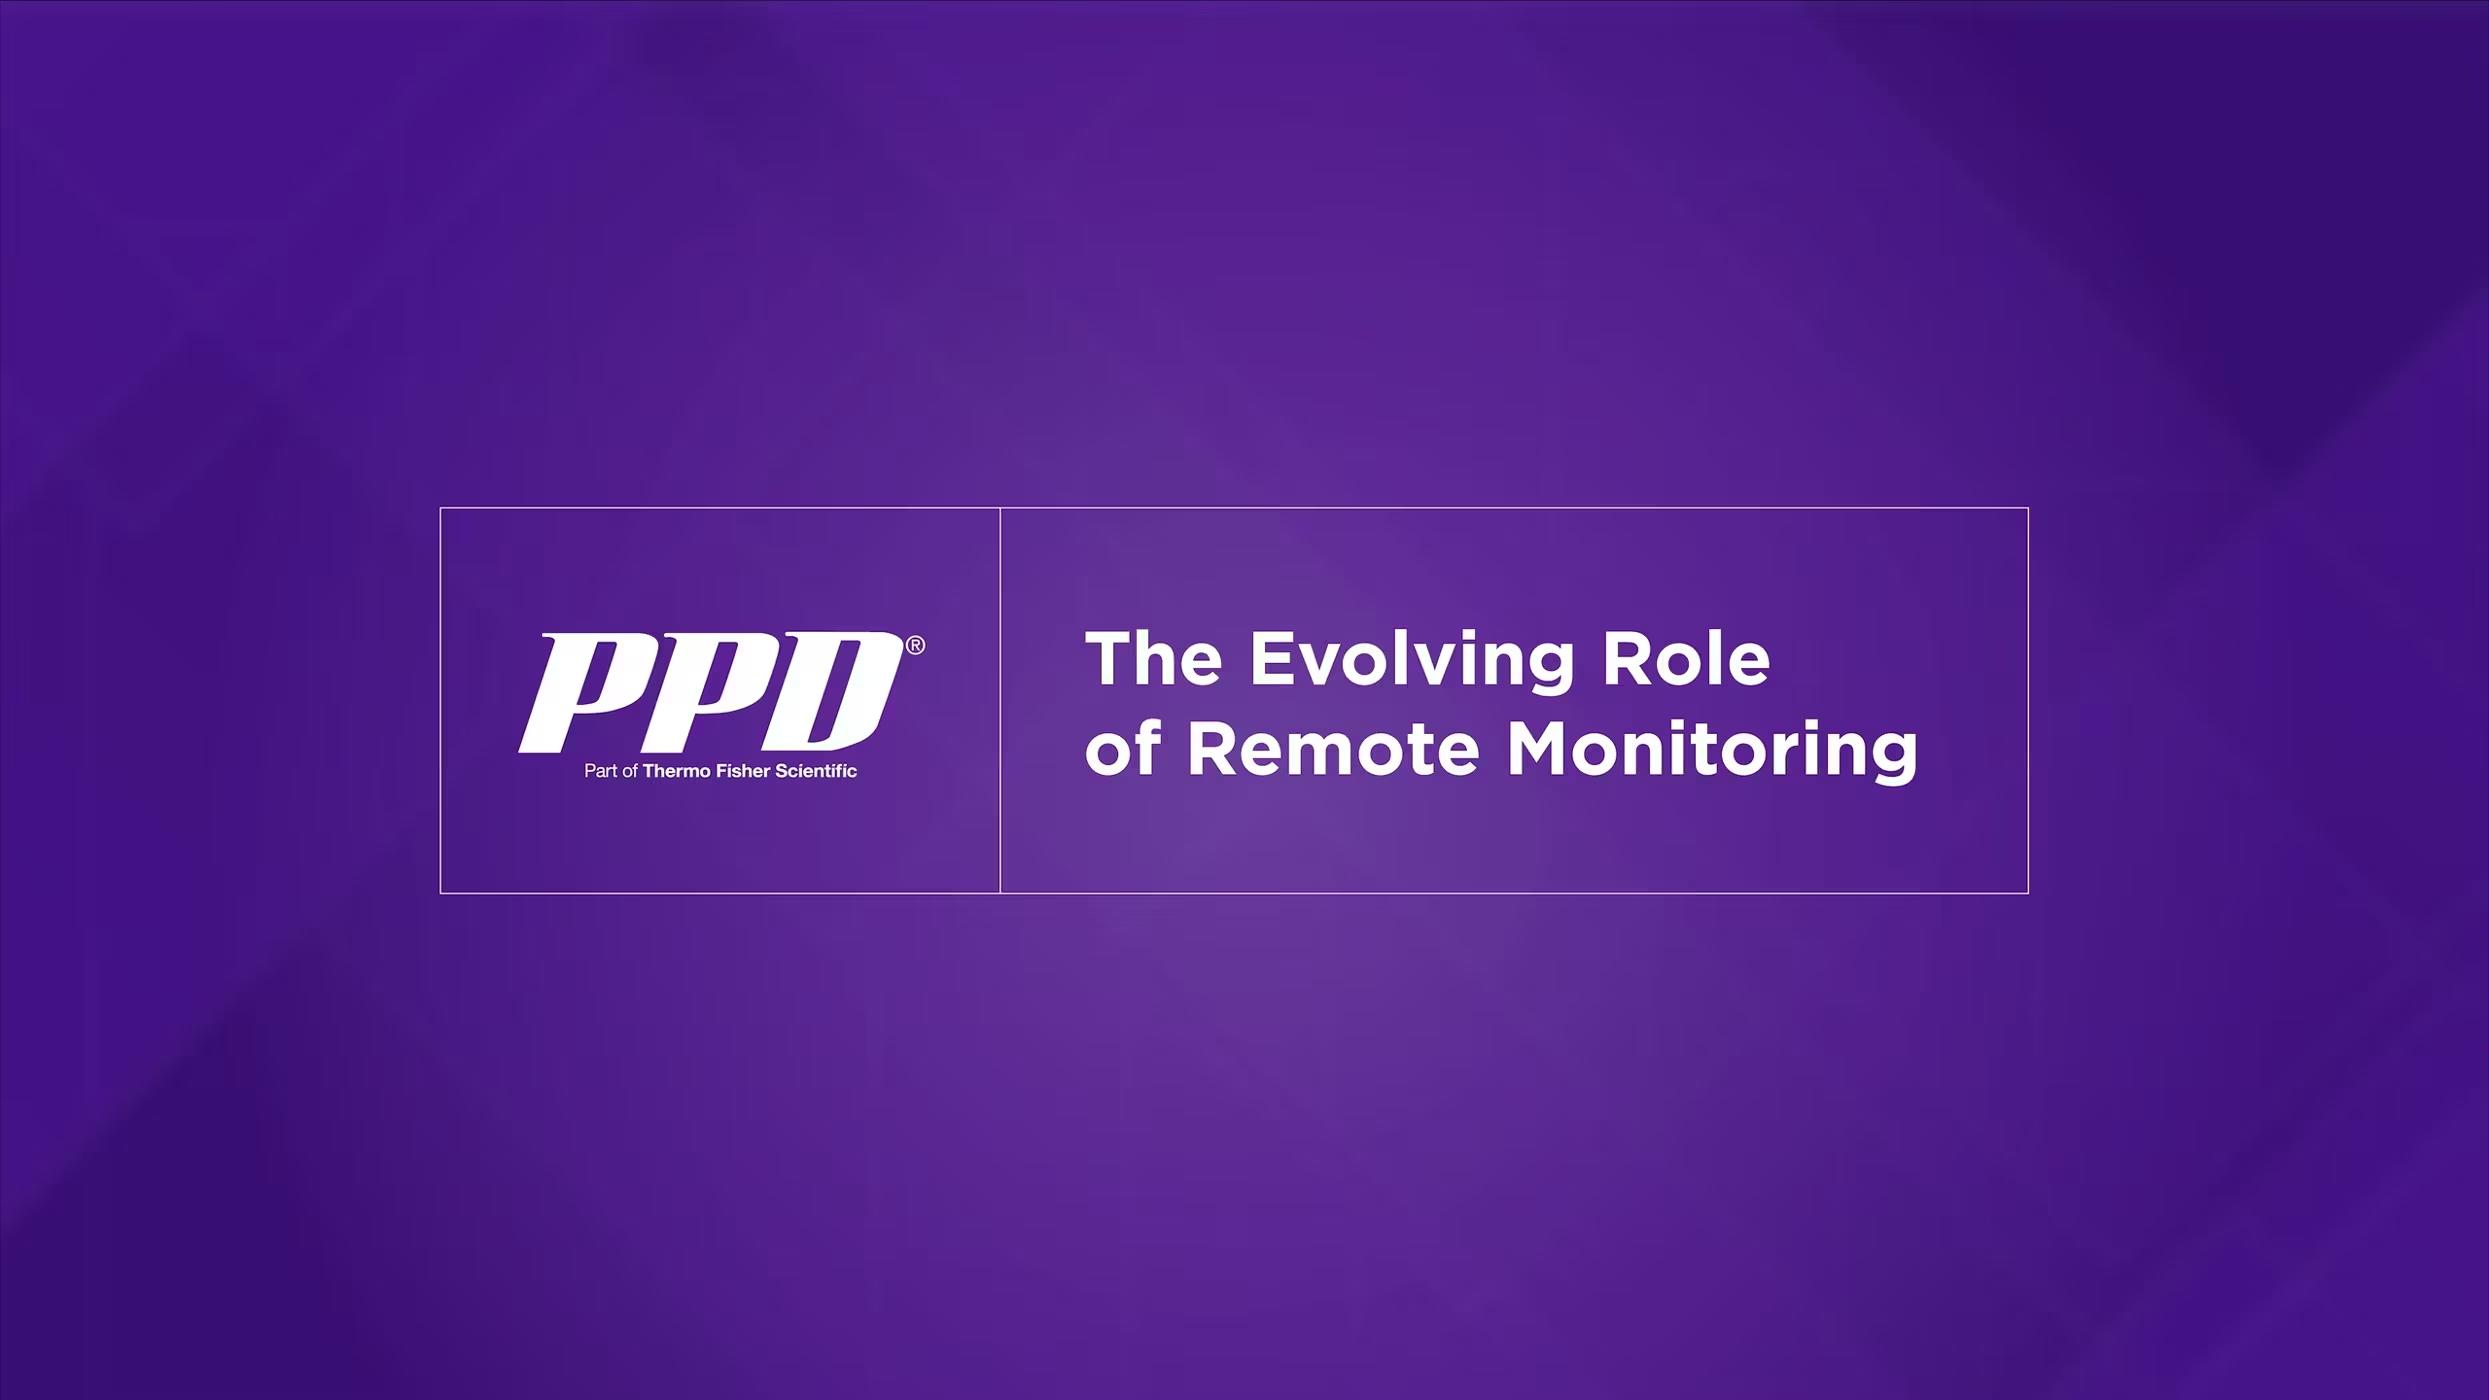 The Evolving Role of Remote Monitoring